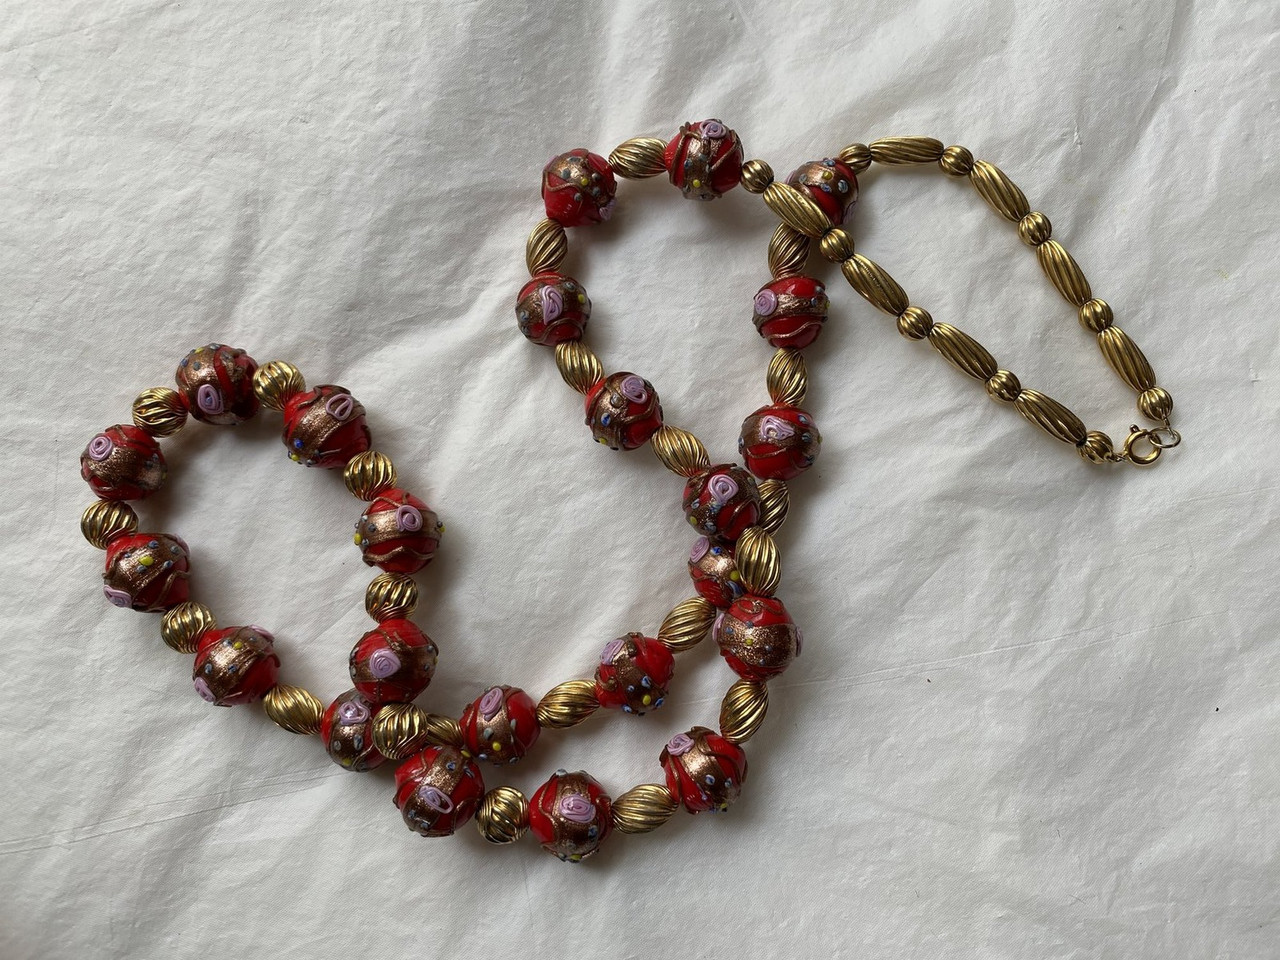 Vintage necklace made of different wood beads, small glass beads